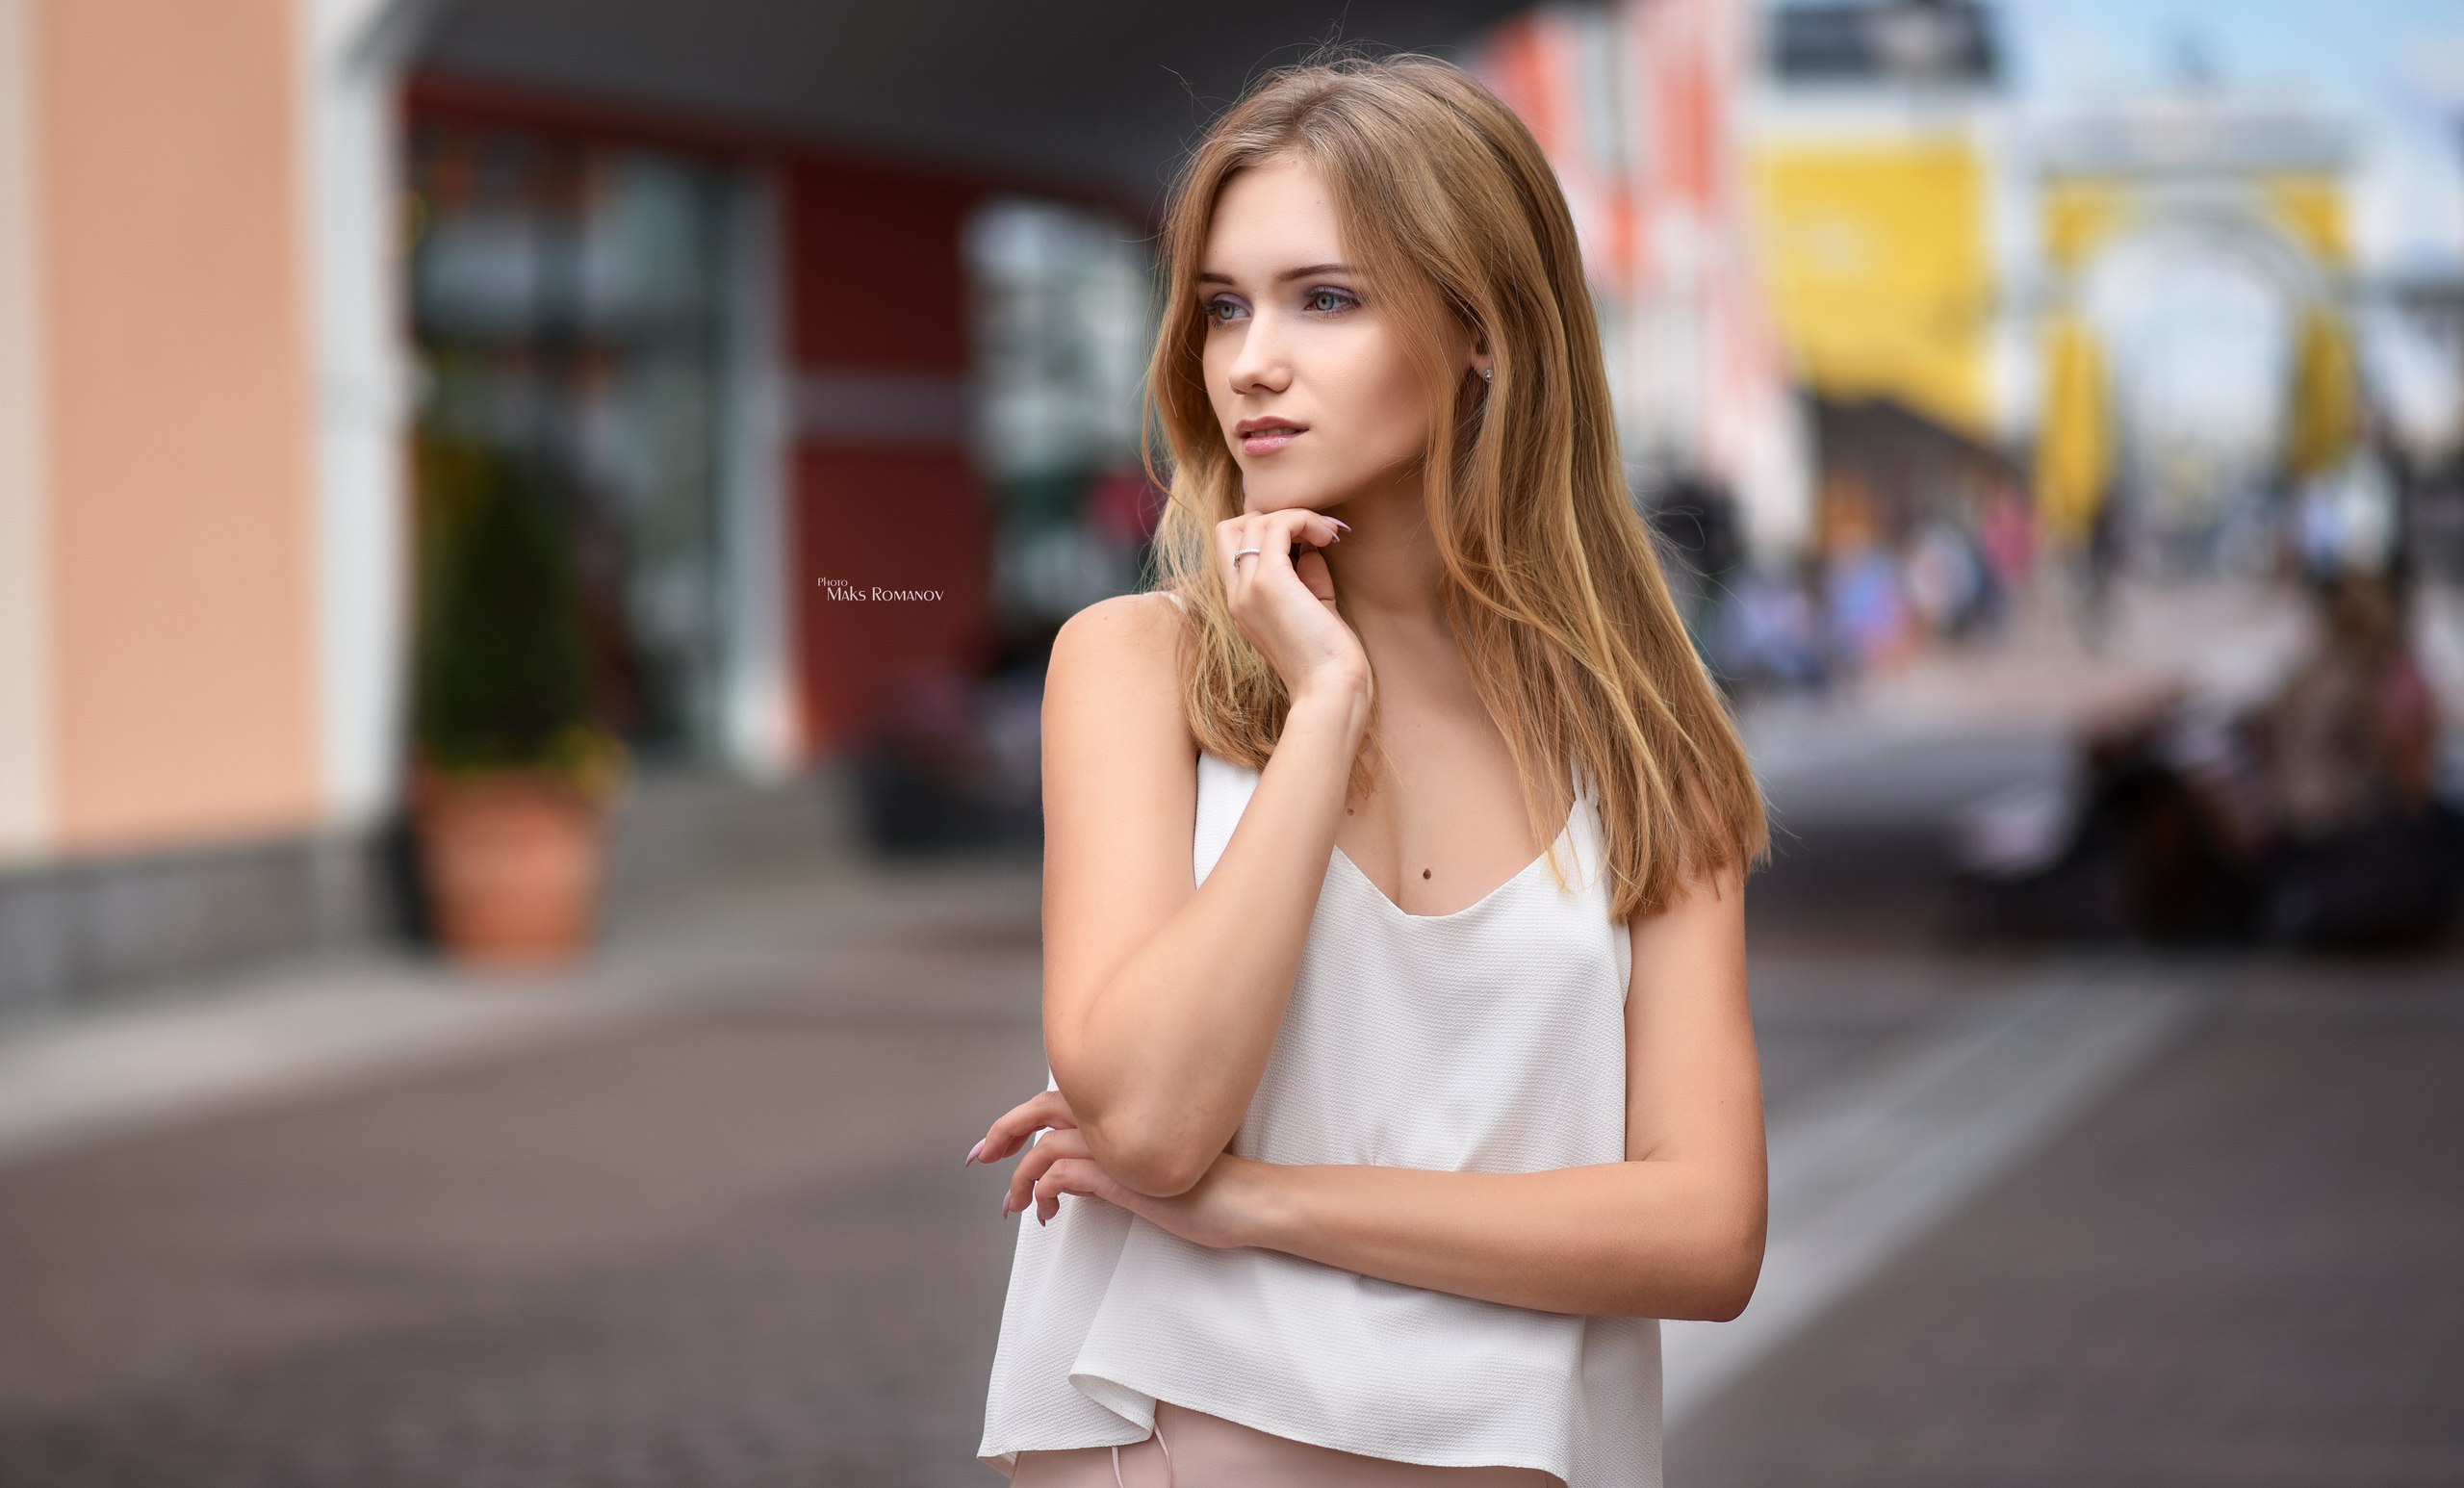 People 2560x1546 women Maxim Romanov blonde portrait depth of field women outdoors white clothing public white tops touching face watermarked